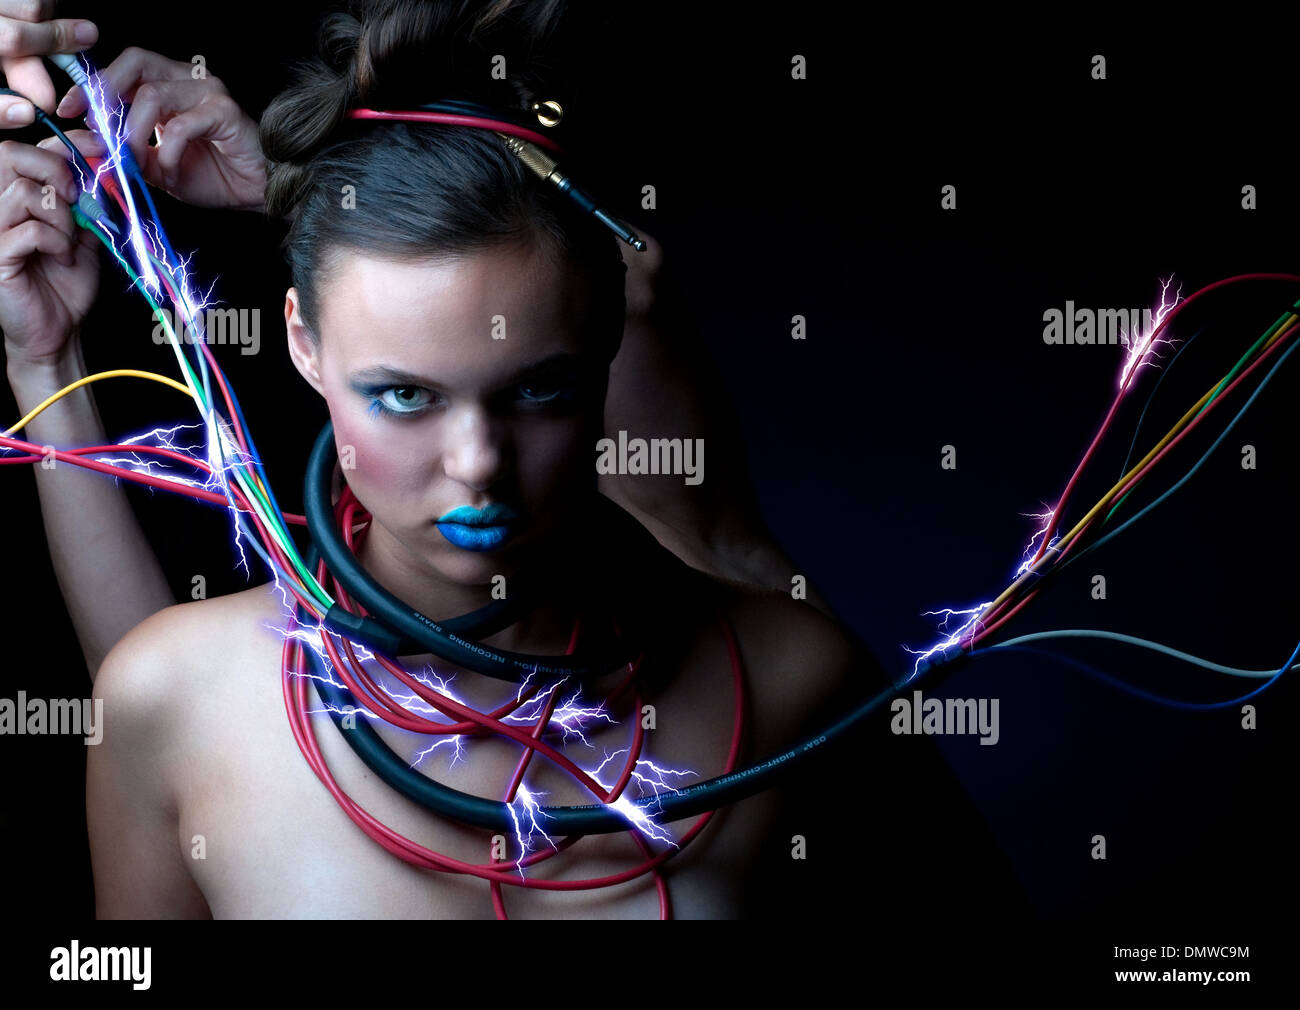 A robot like woman staring at camera with sparkling electric cables wrapped around her neck. Hands are adjusting cables. Stock Photo